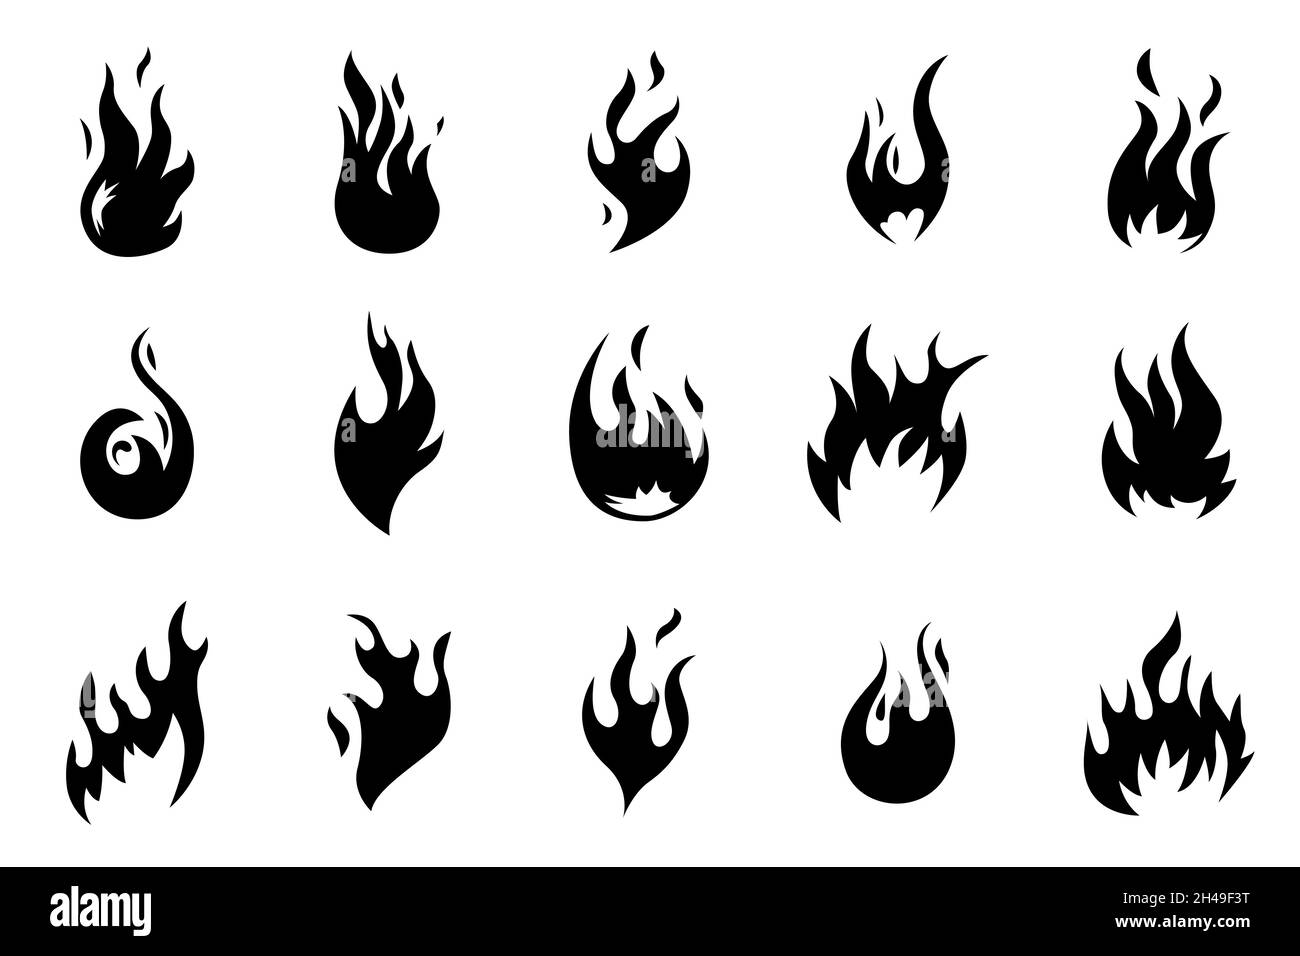 Black fire icons. Flames shapes. Heat fires silhouettes. Isolated hot blaze, bonfire logo. Warning heat and flammable, campfire recent vector set Stock Vector